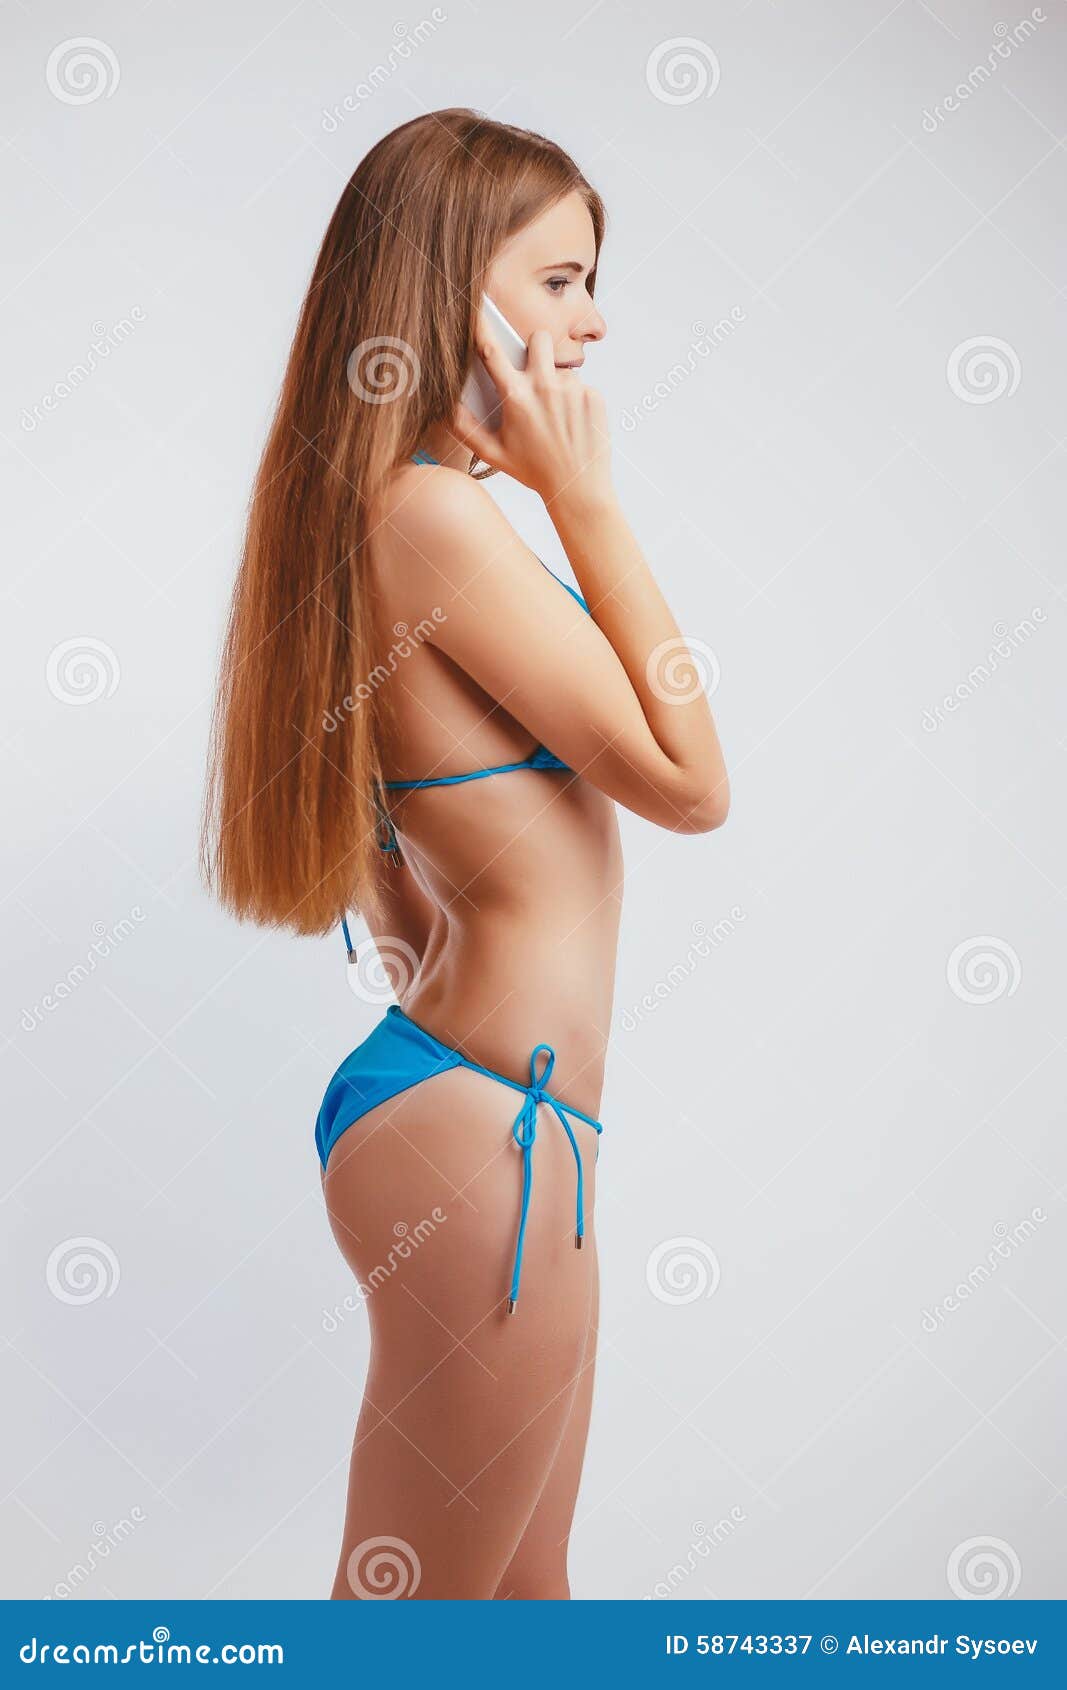 Woman in a Bathing Suit Talking Phone Stock Image image